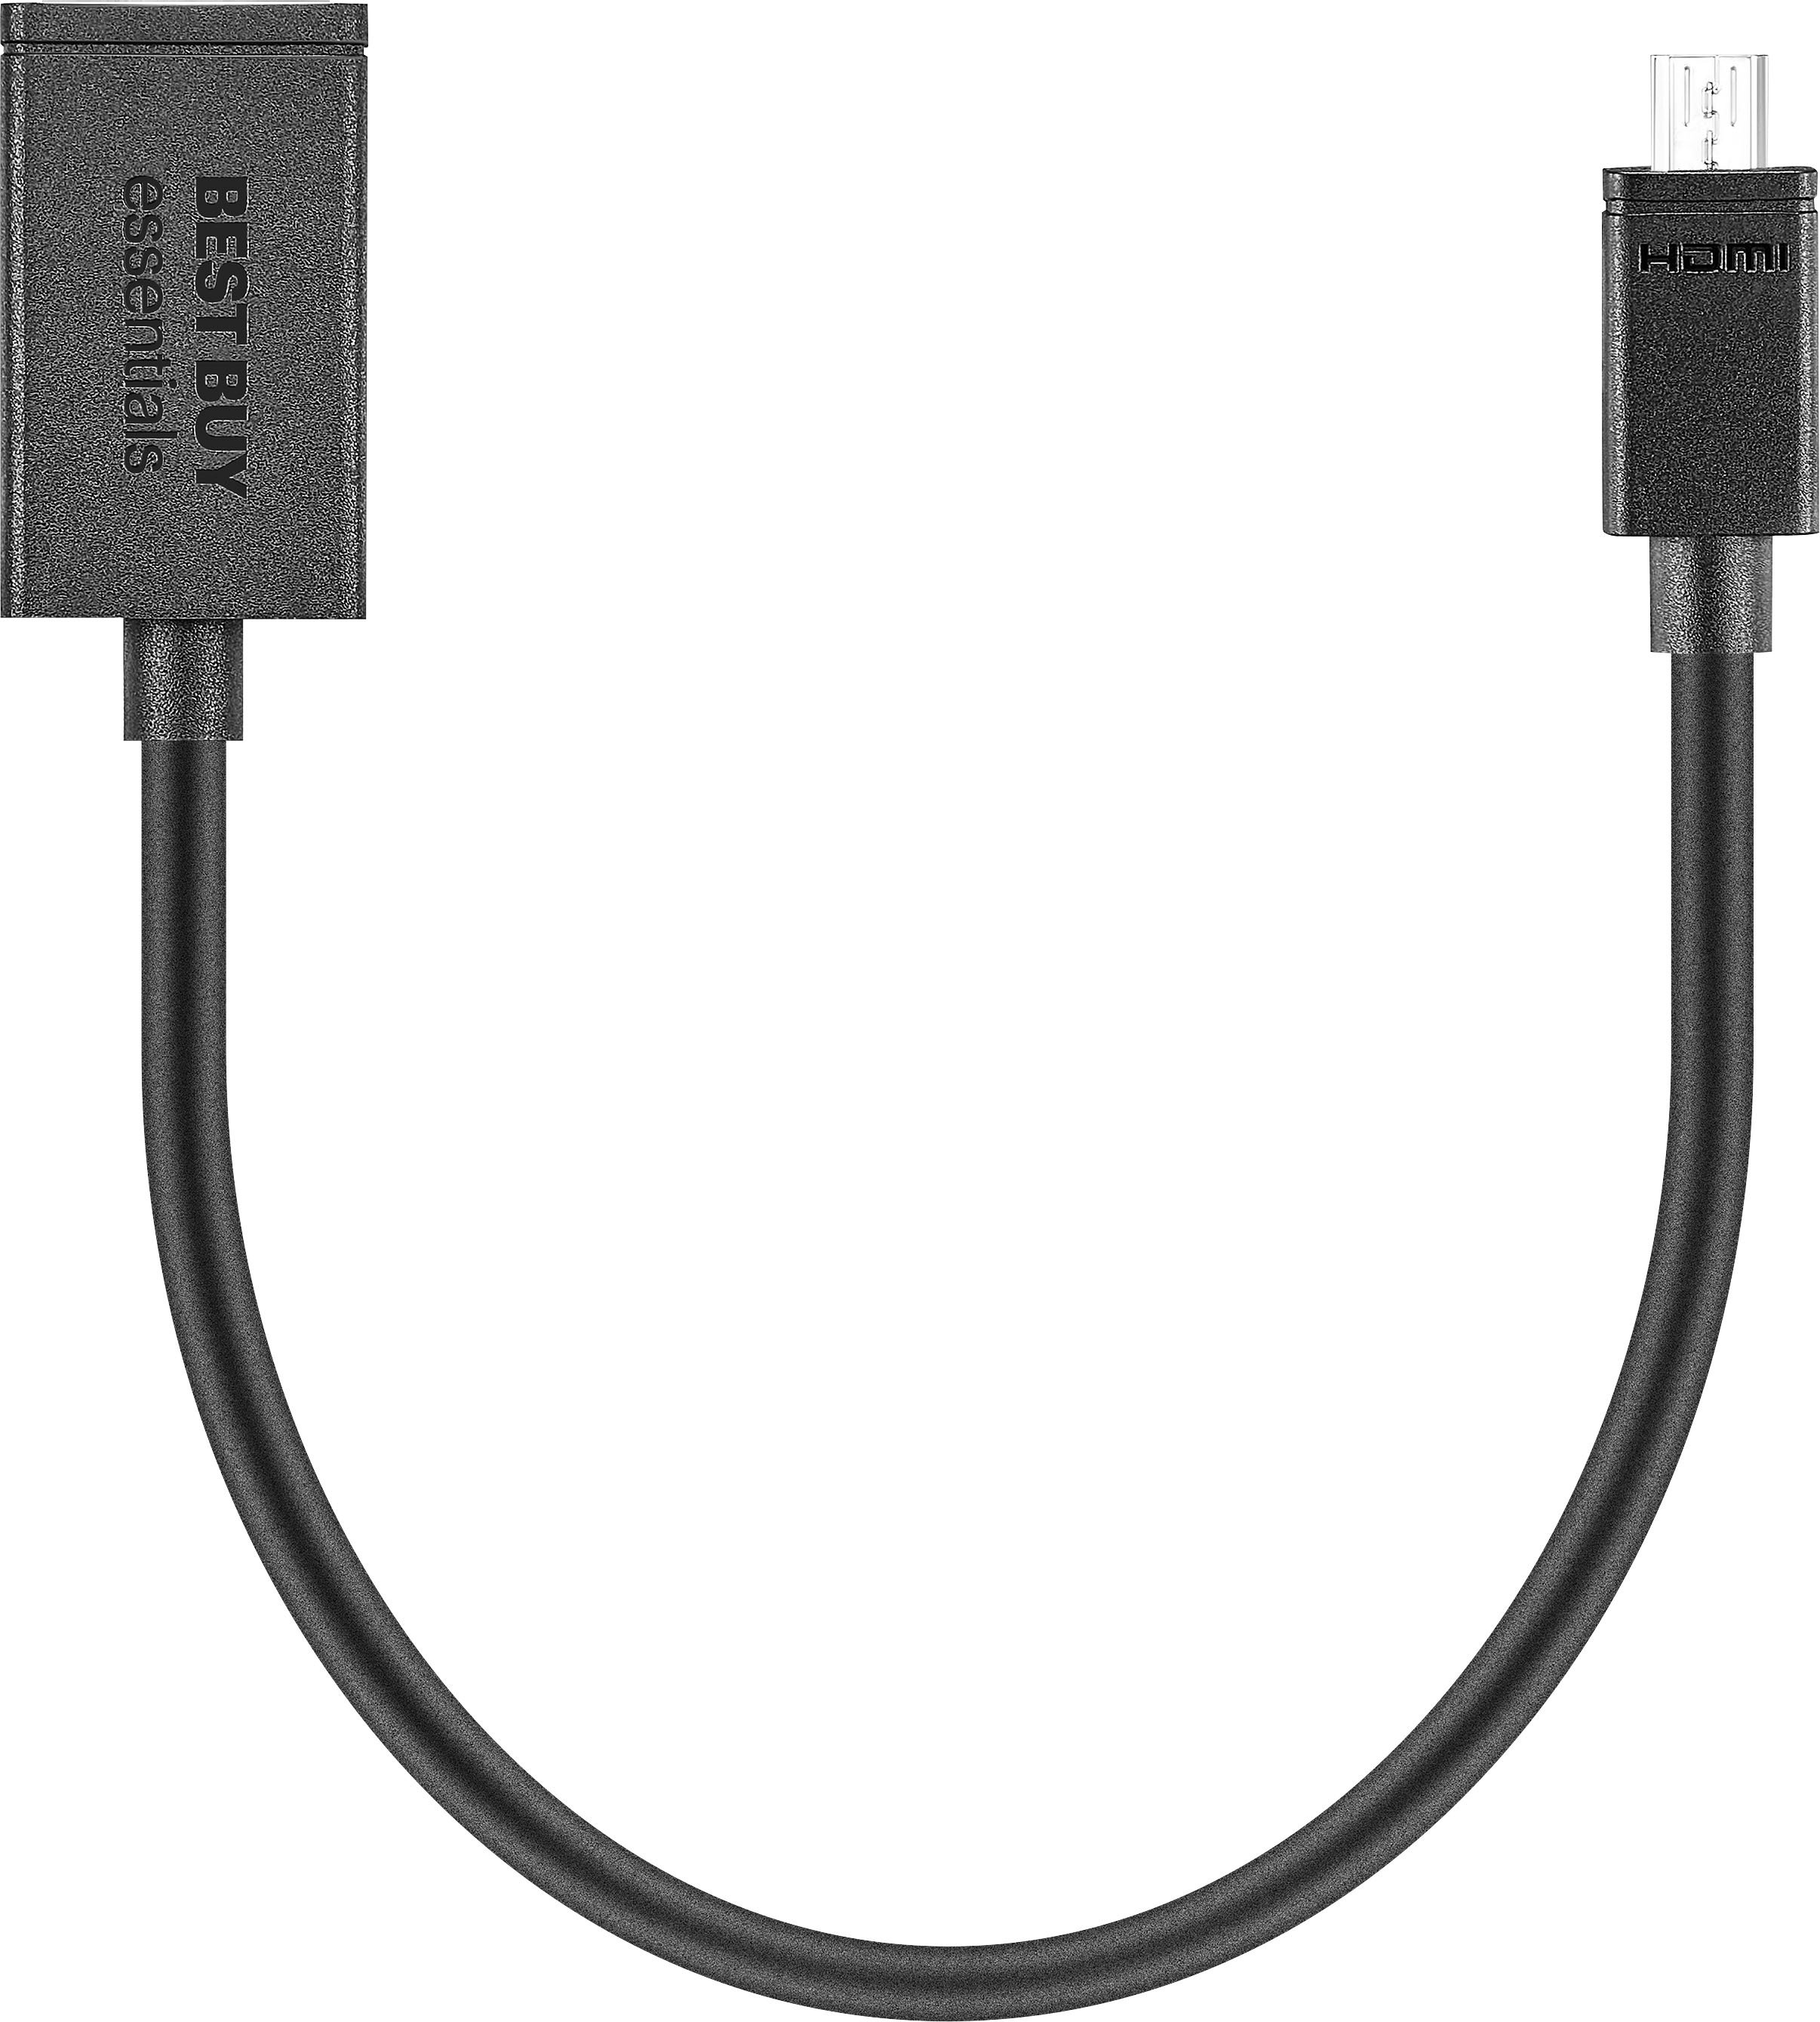 Best Buy essentials™ Micro HDMI to HDMI Adapter Black BE-HCL306 - Best Buy